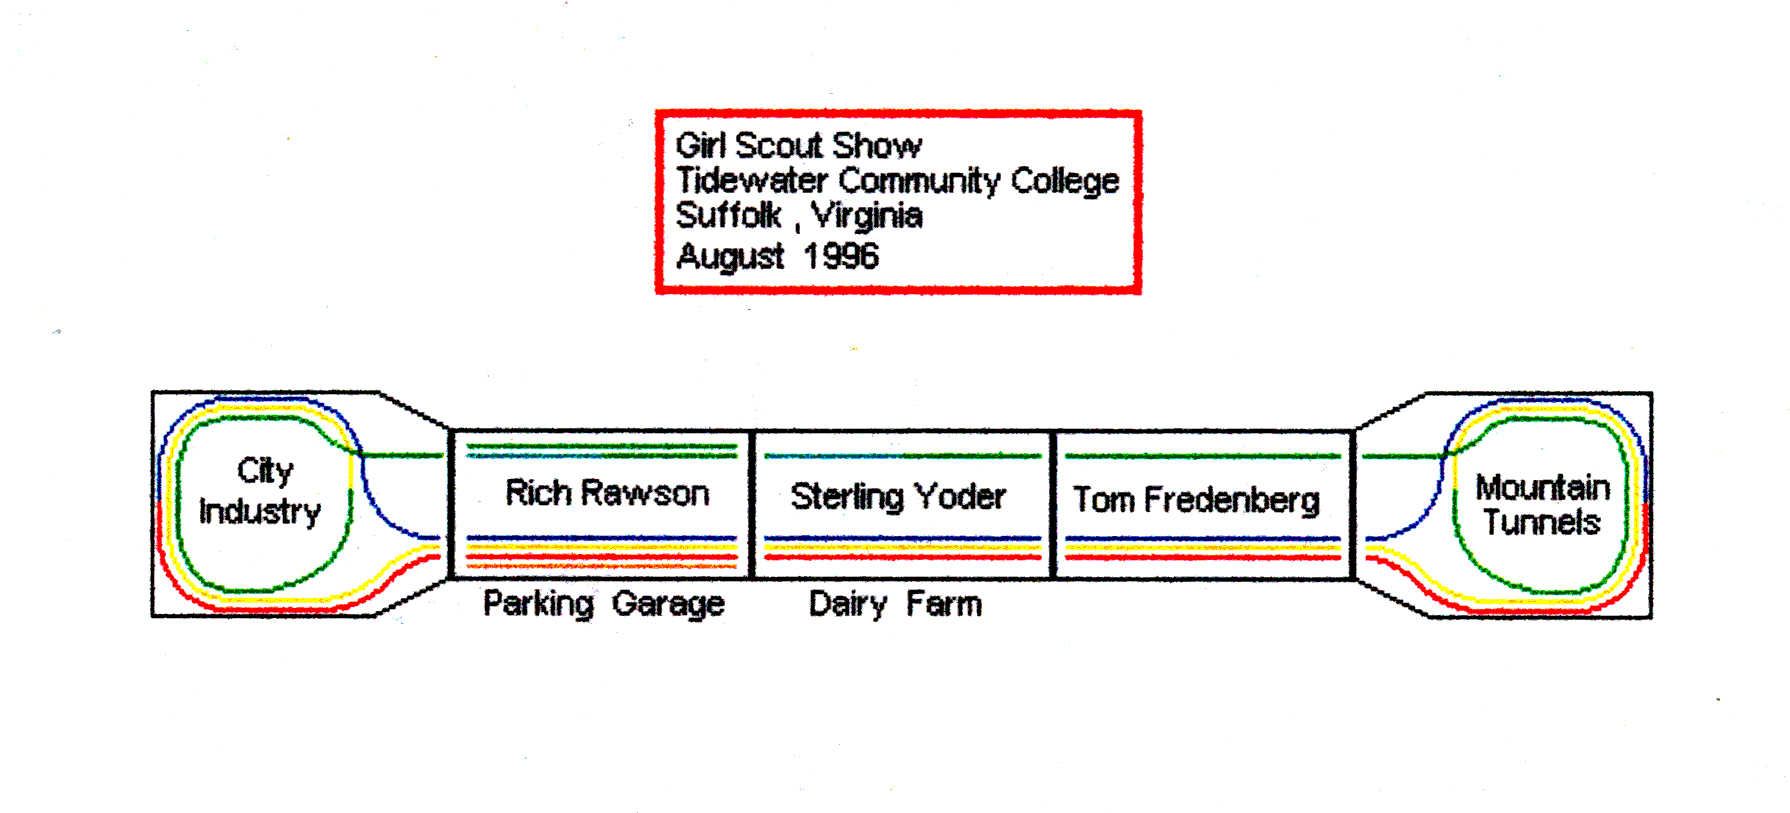 Summer 1996 Girl Scout layout